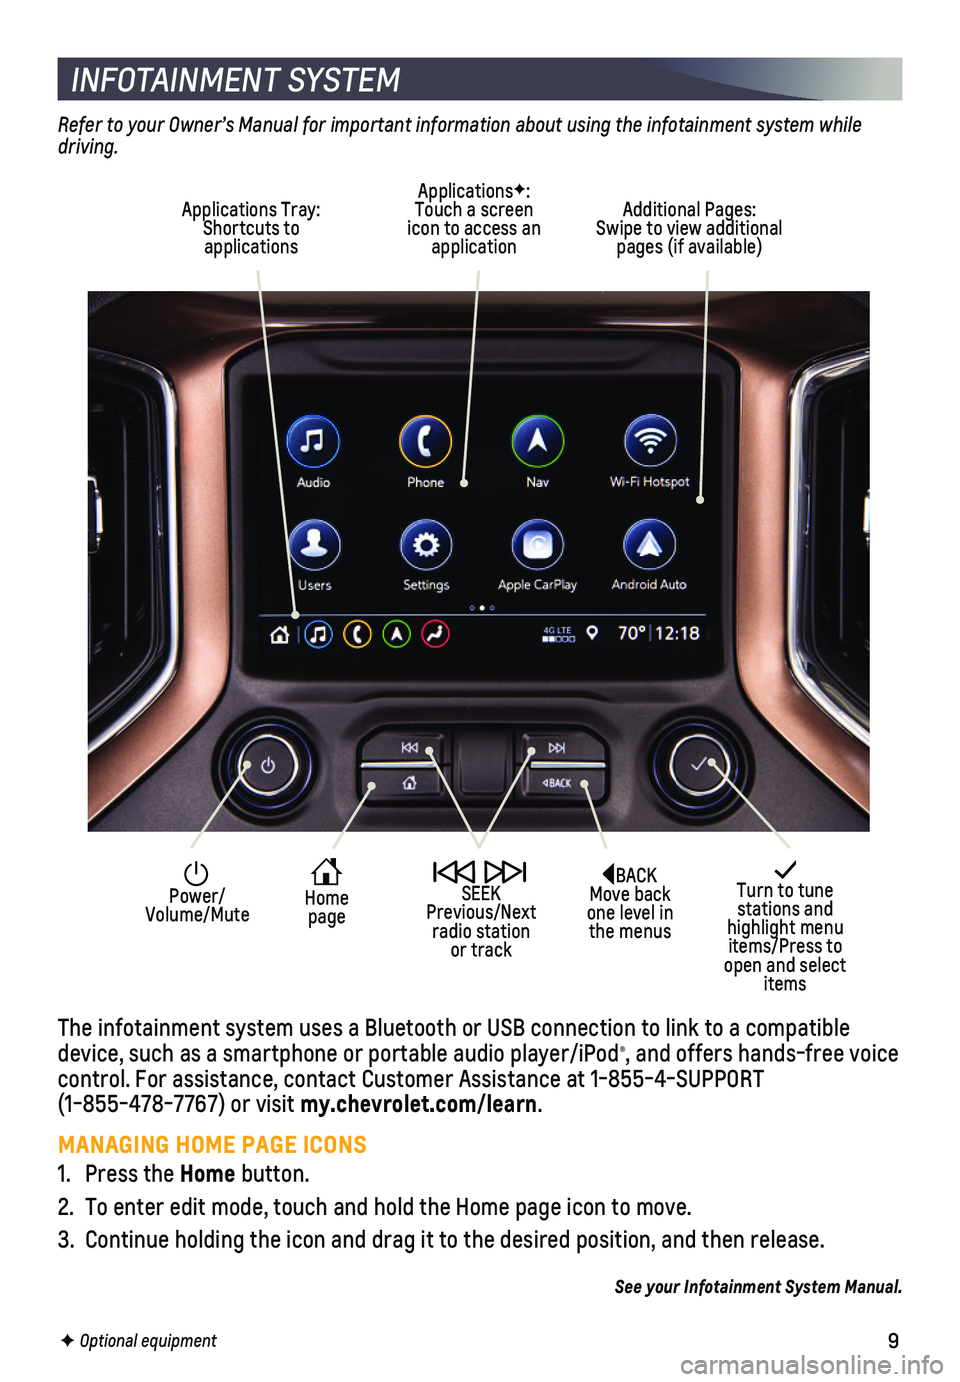 CHEVROLET SILVERADO 2019  Get To Know Guide 9
INFOTAINMENT SYSTEM
The infotainment system uses a Bluetooth or USB connection to link to a \
compatible device, such as a smartphone or portable audio player/iPod®, and offers hands-free voice con